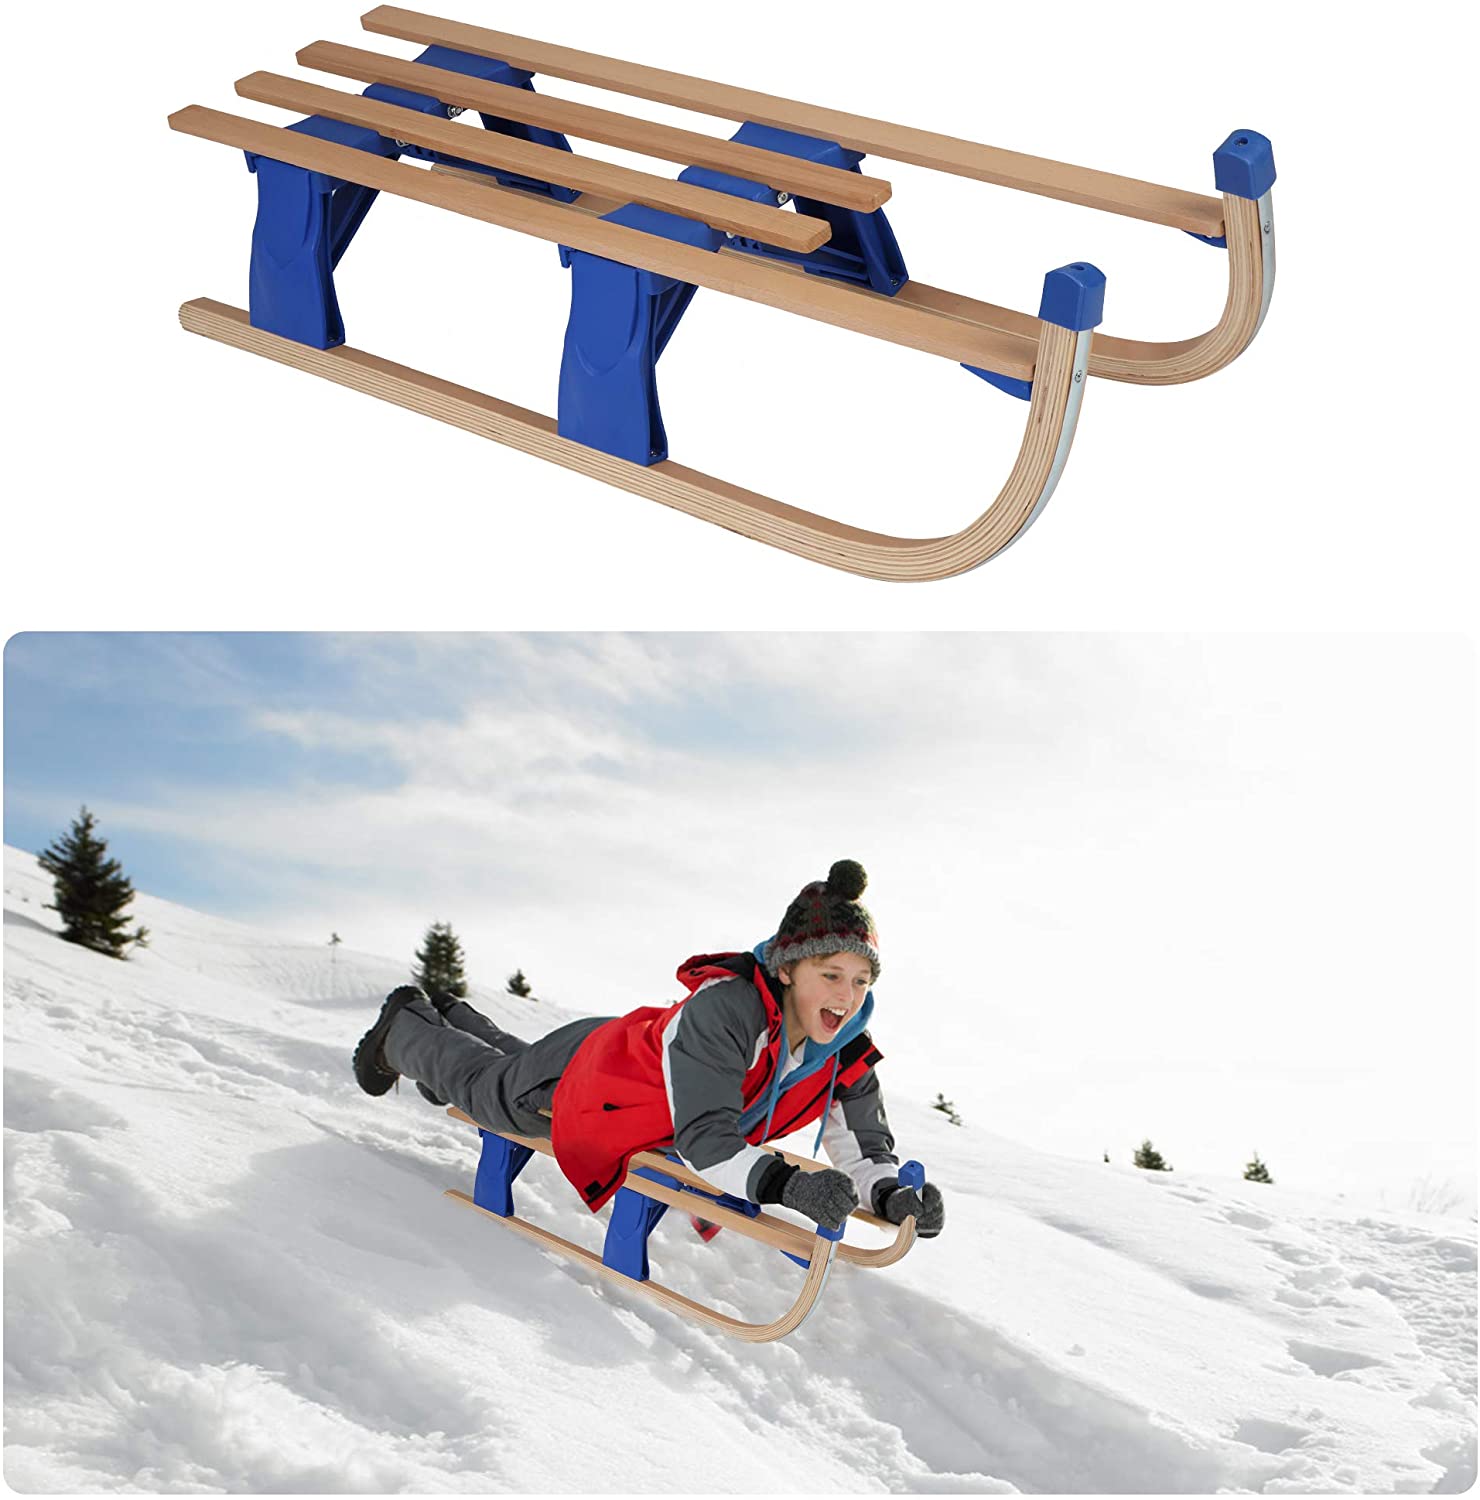 (Out of Stock) Sled Wooden Foldable For Kids And Adult Outdoor Play With A Pulling Rope 42 inch Weight Capacity, 220lbs